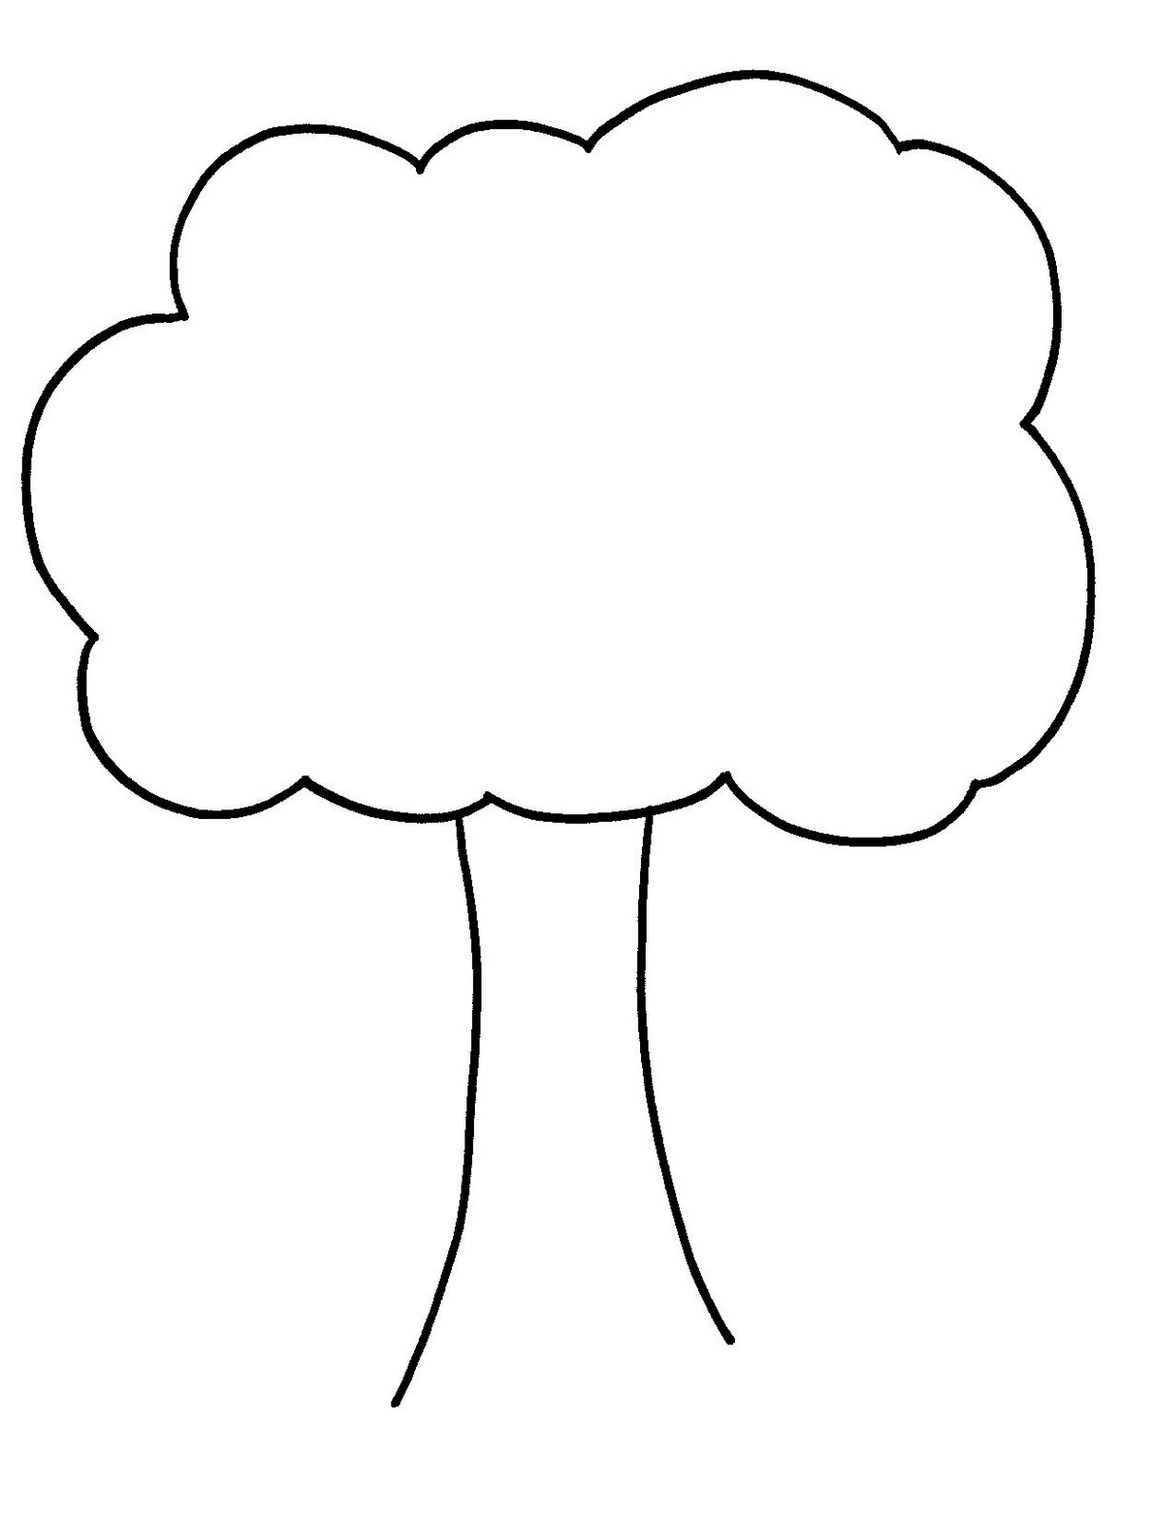 Outline Of Tree Branches - ClipArt Best